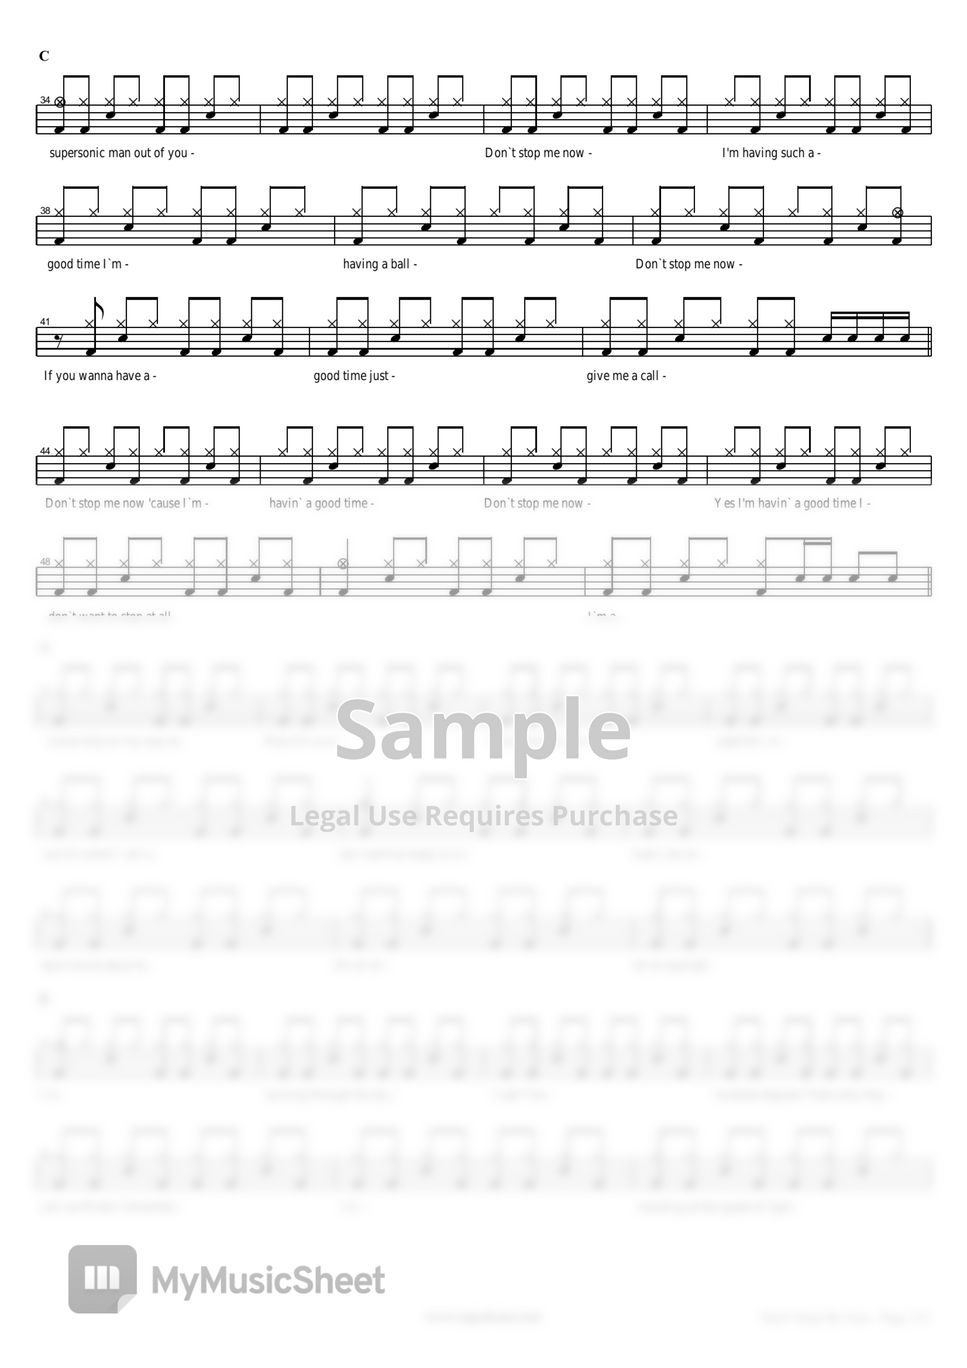 Queen Dont Stop Me Now Sheet By Copydrum